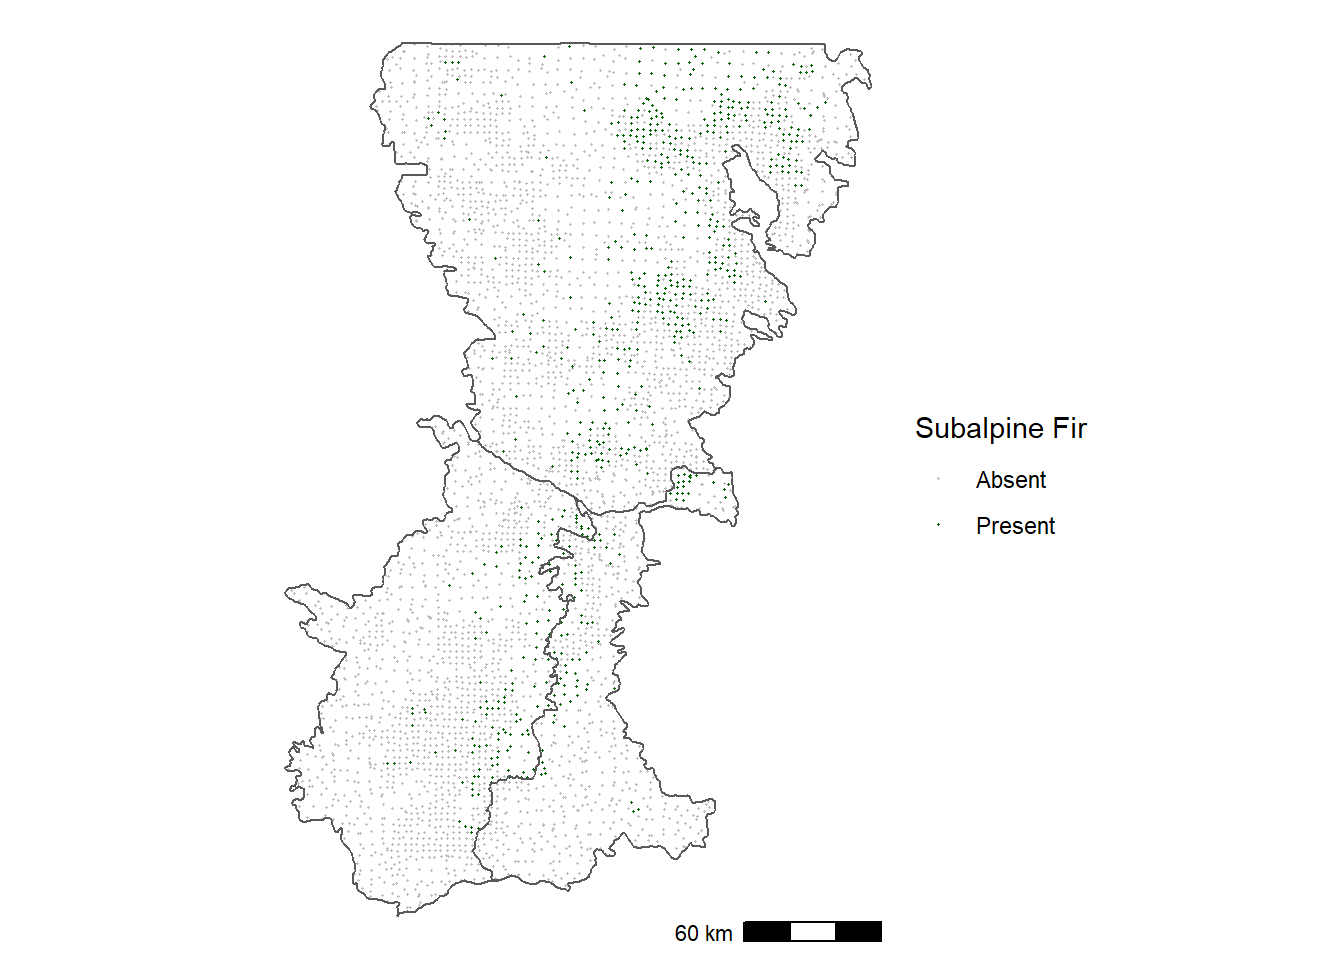 Occurrence of subalpine fir in forest inventory plots in the Washington Cascades.